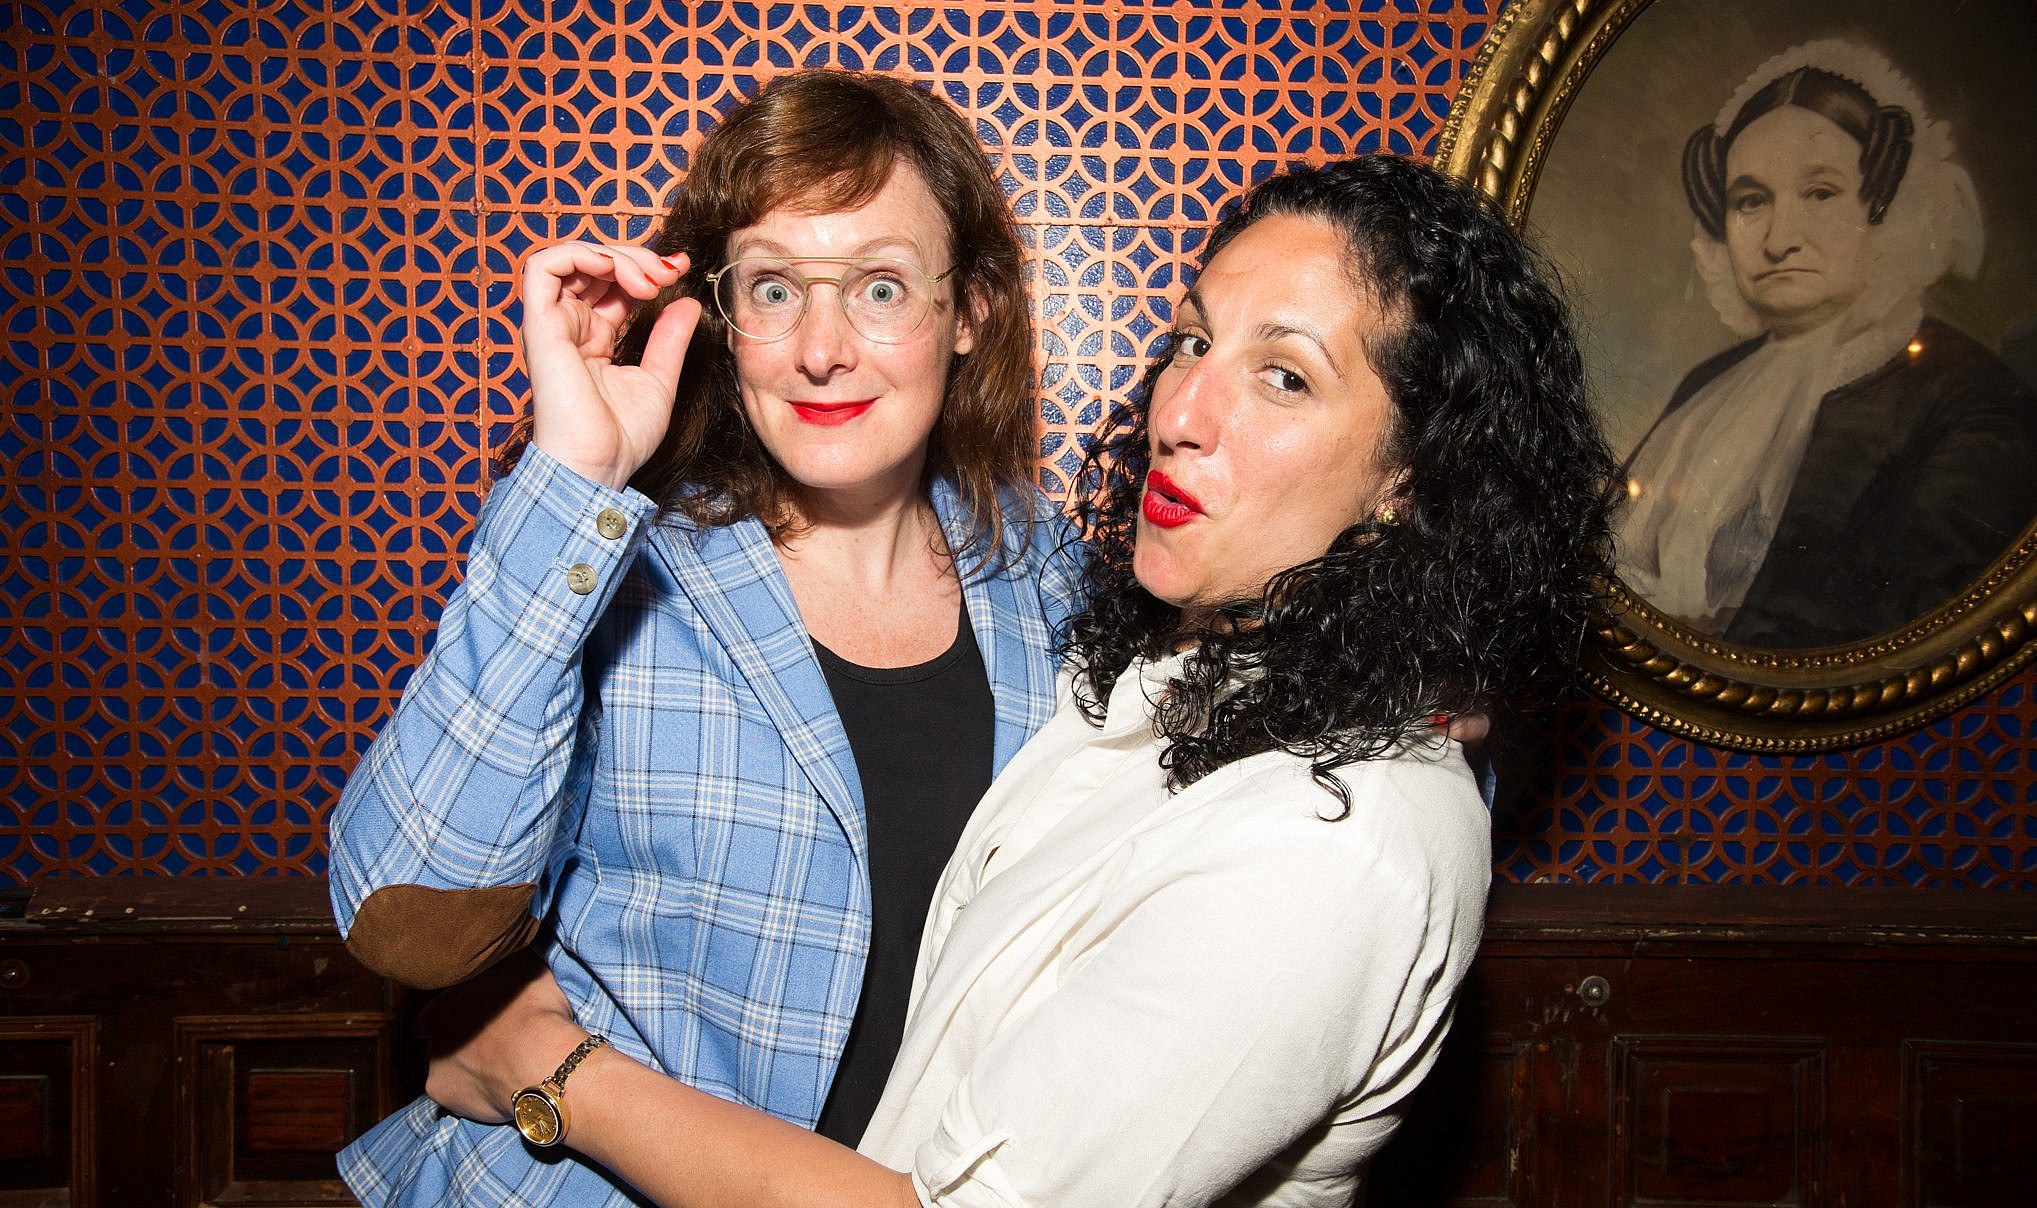 Married lesbian Palestinian-Jewish comedians aim get make history | Times of